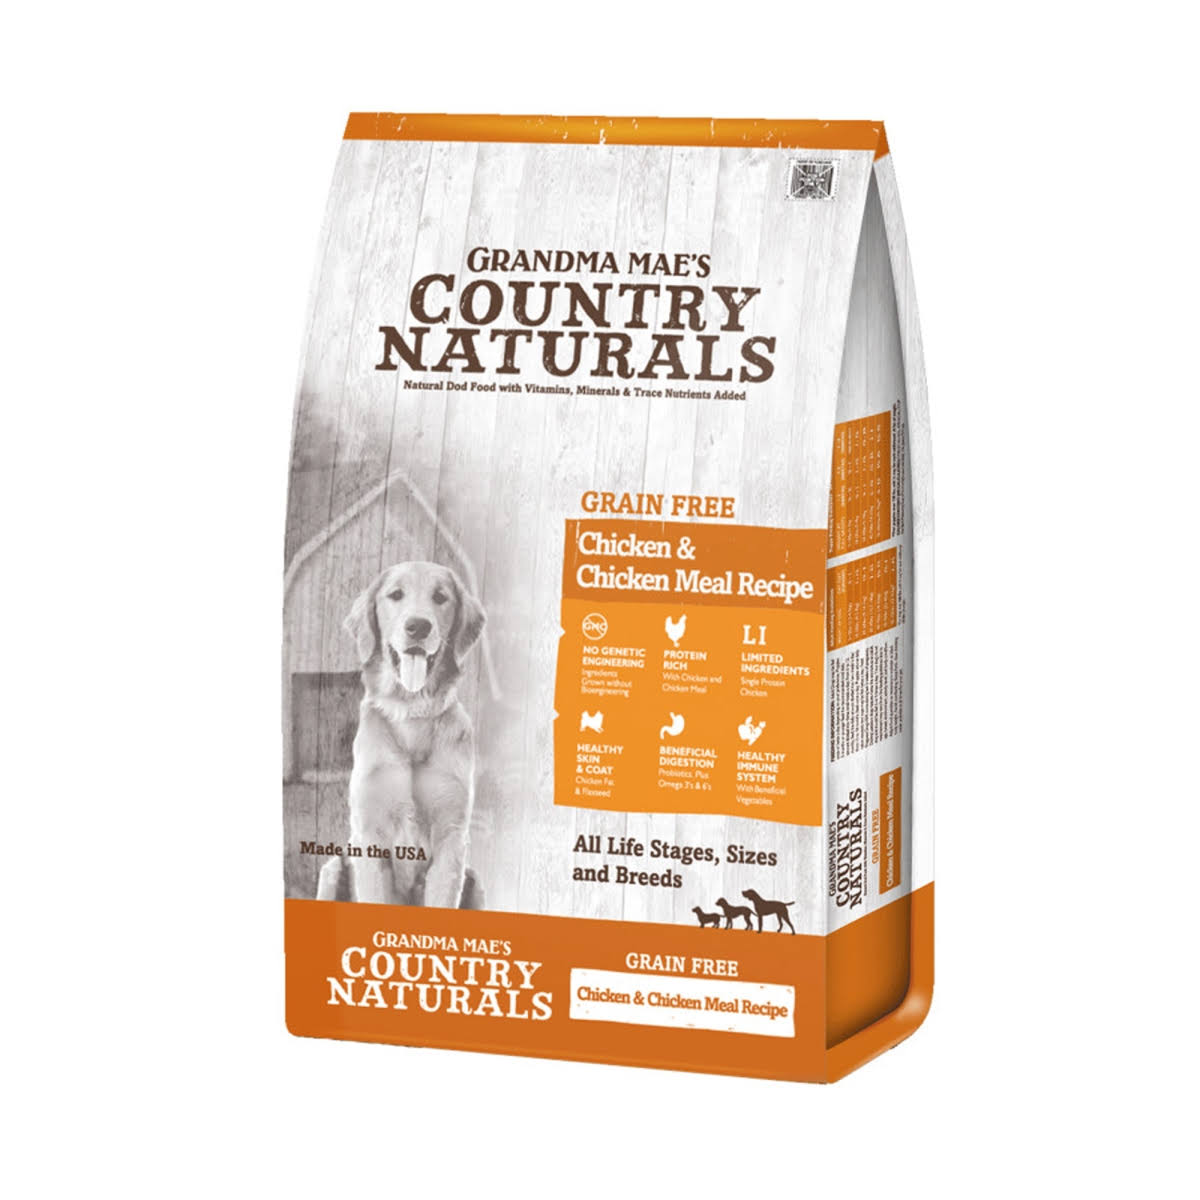 Grandma Mae's 79700188 25 lb Country Naturals Grain Free Chicken & Chicken Meal Dog Food, One Size